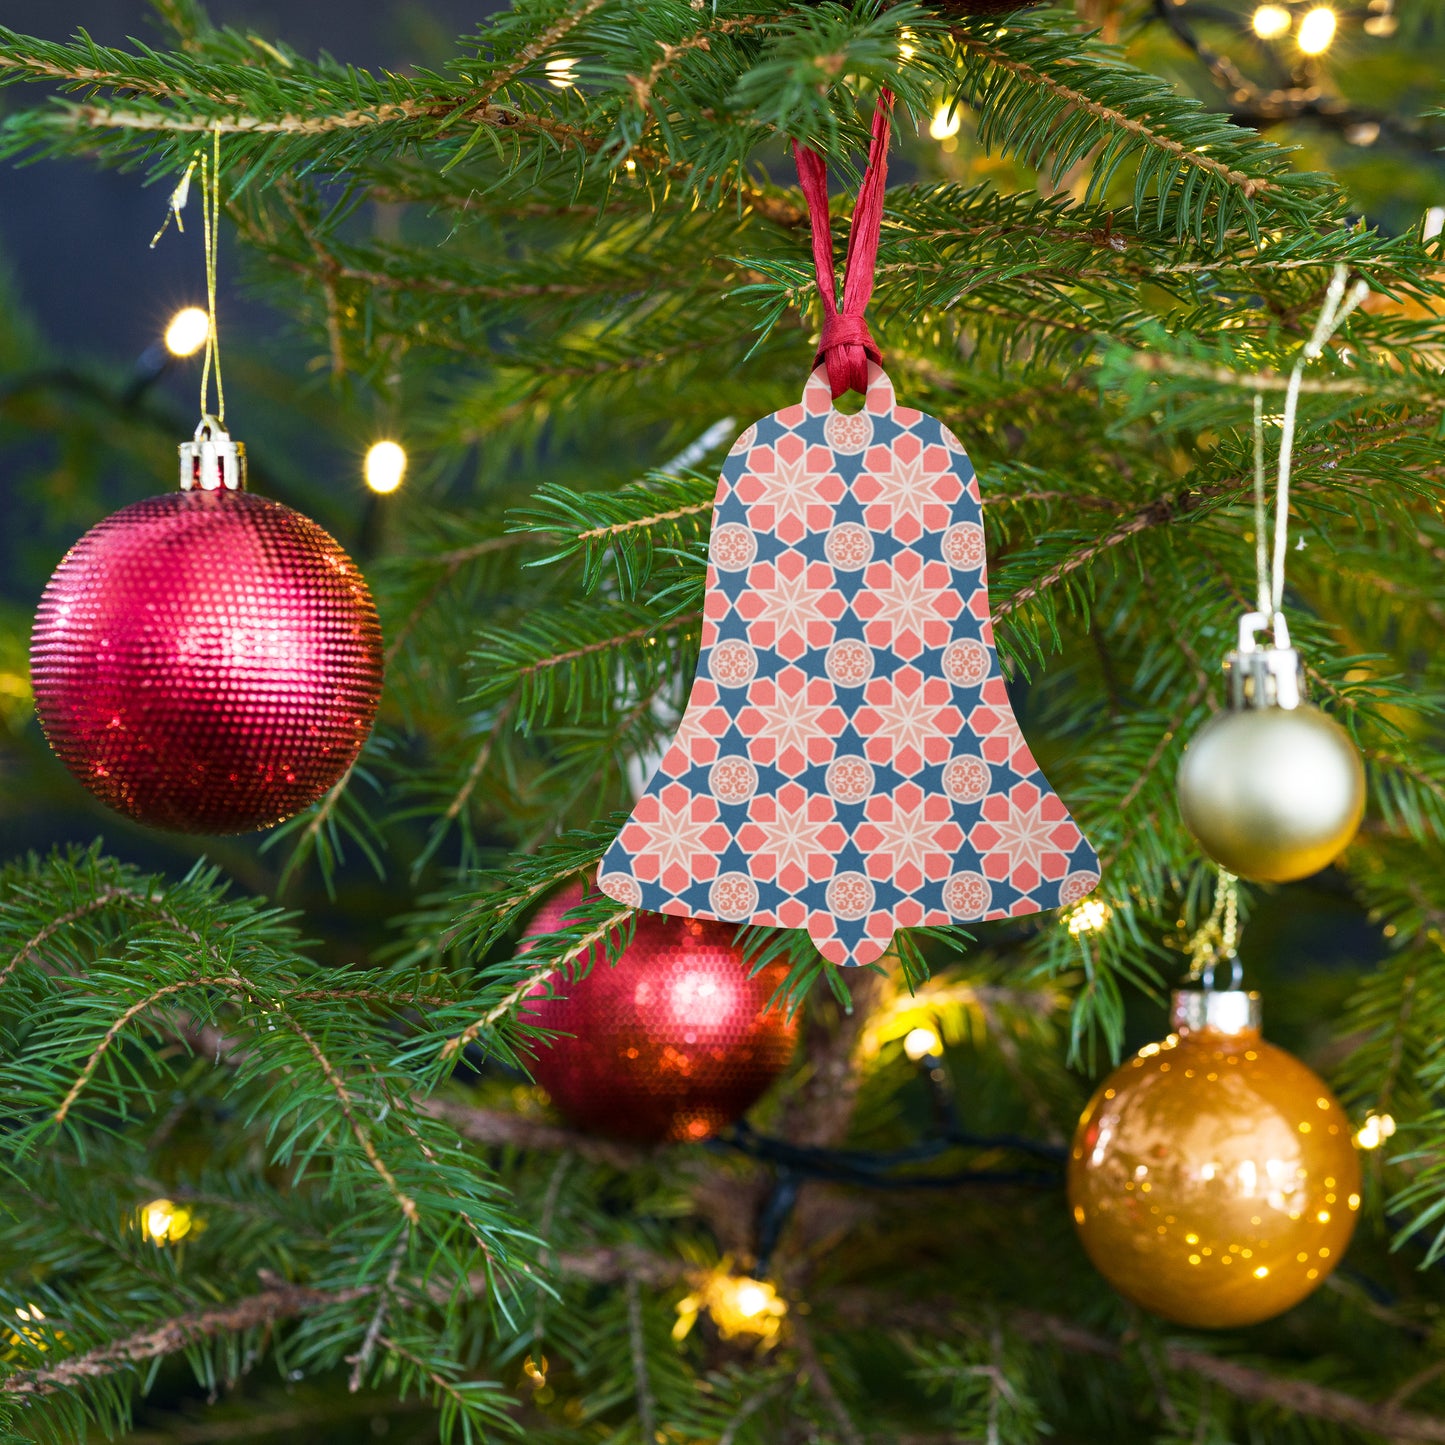 Wooden Holiday Ornaments - Geometric Arabesque Mashup in Pink